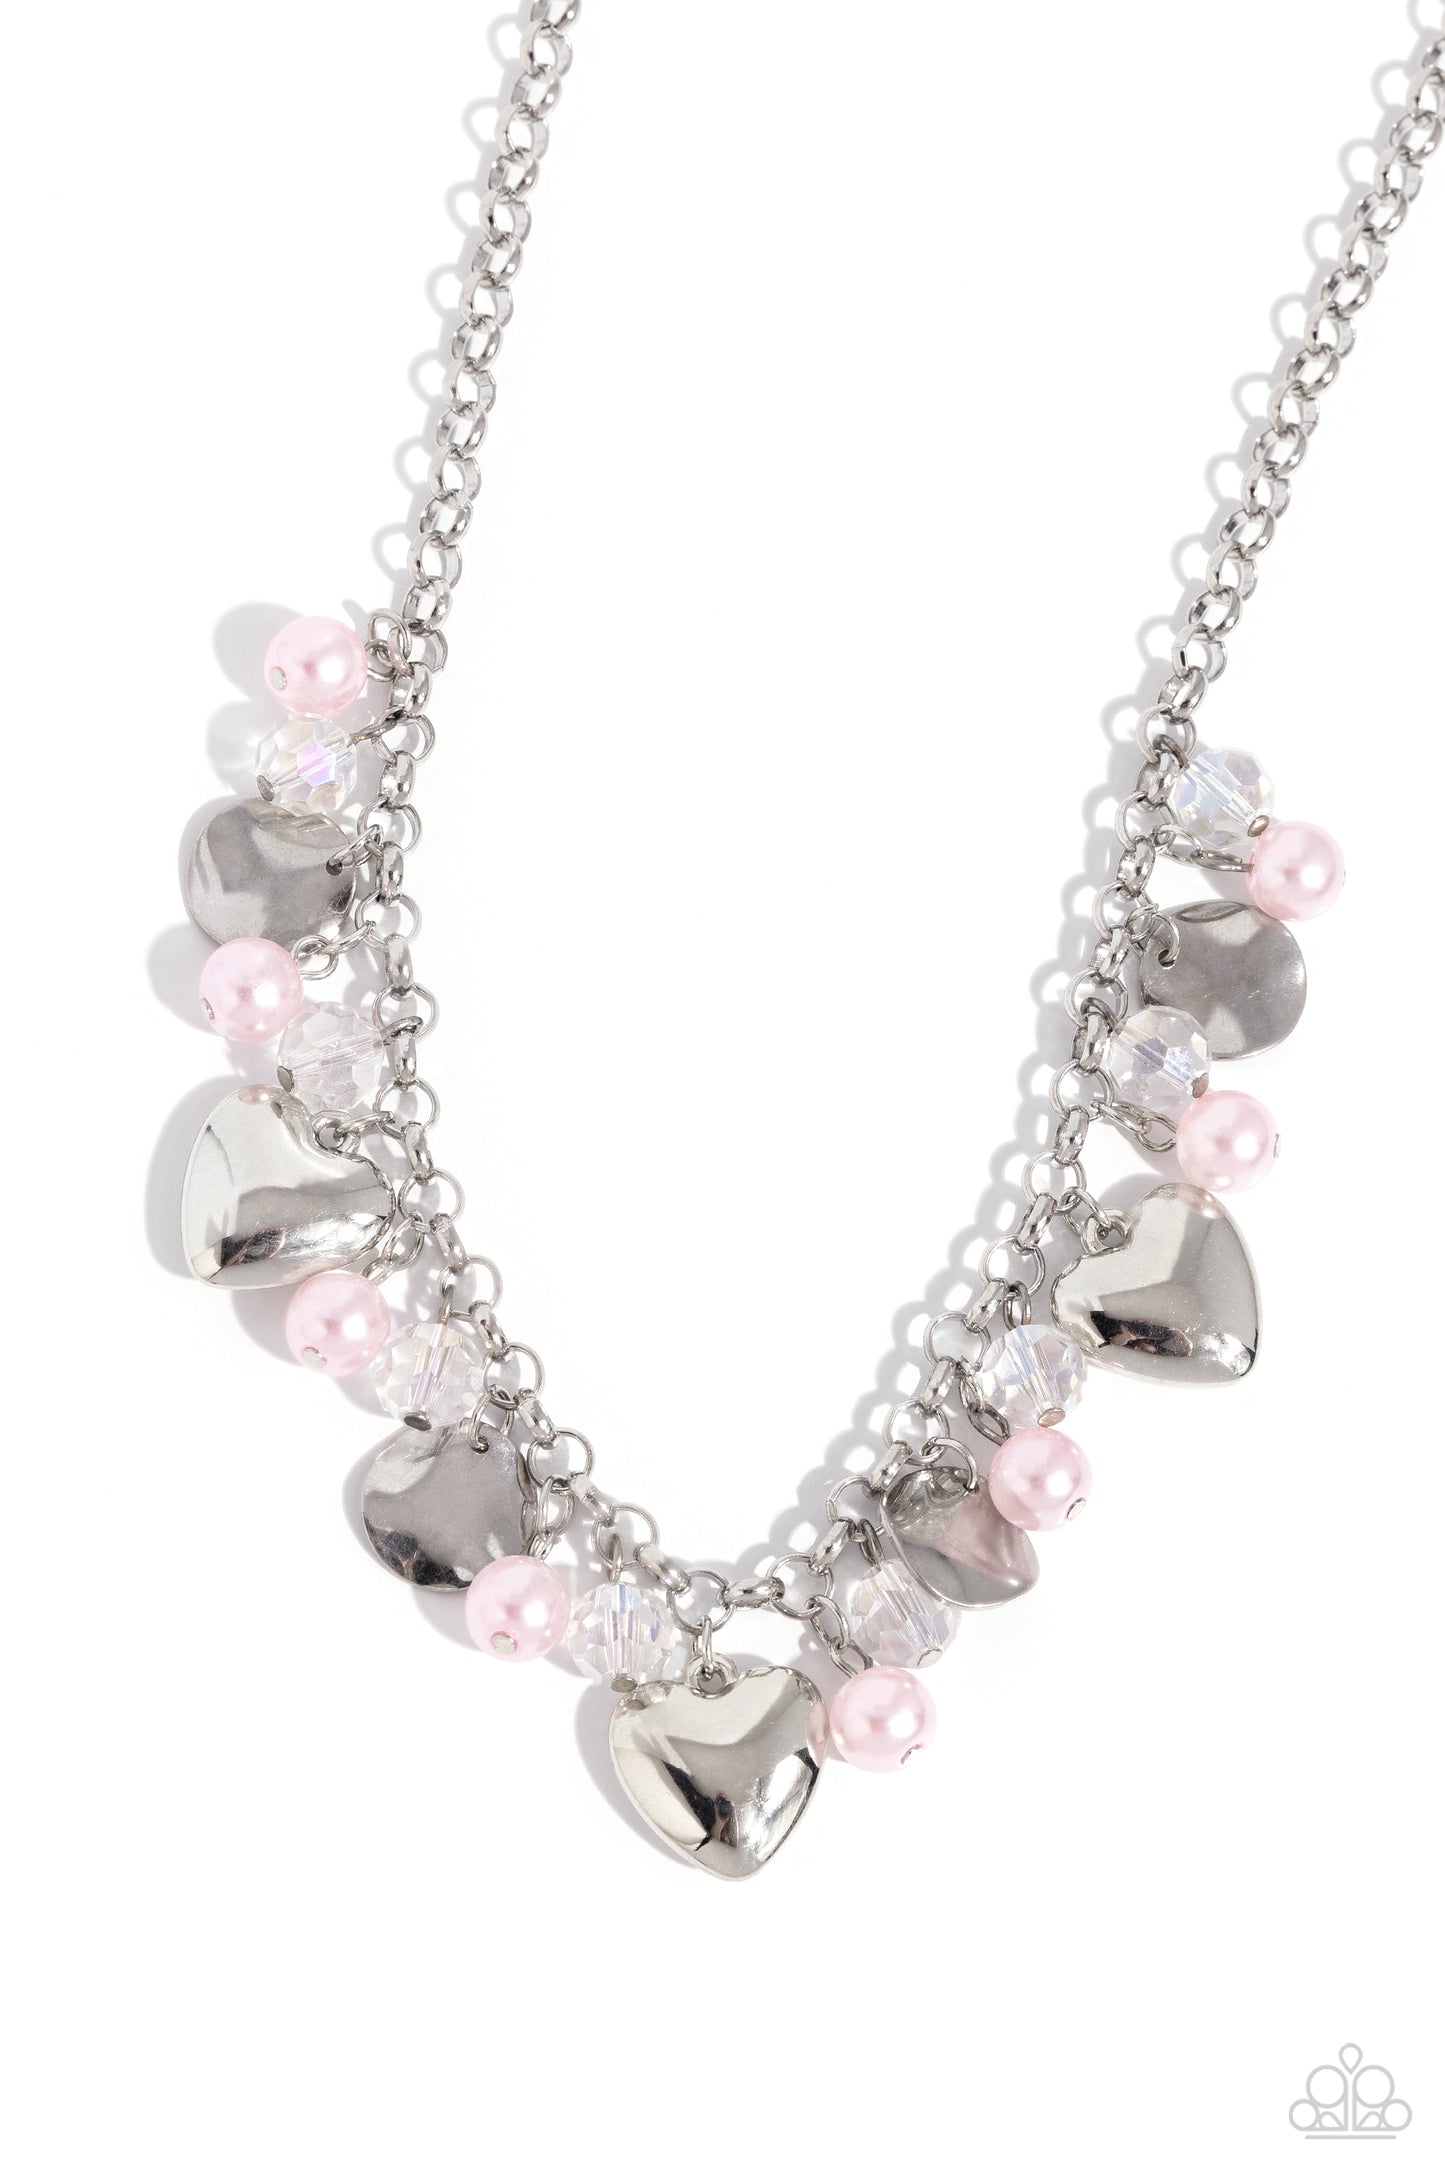  True Loves Trove - pink - Paparazzi necklace